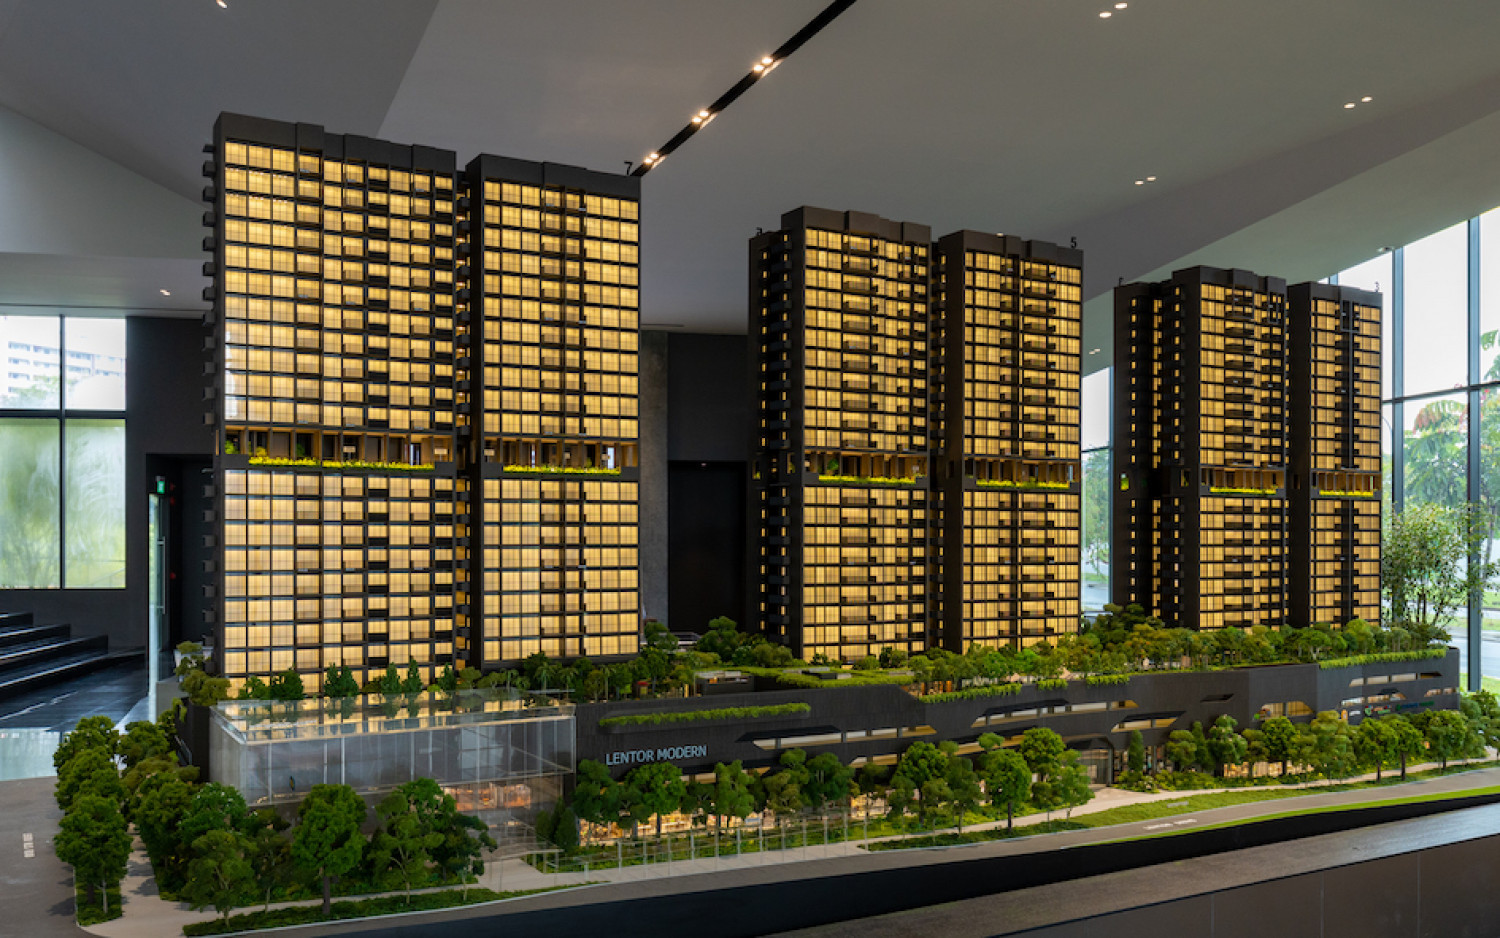 GuocoLand sells 84% of units at Lentor Modern on launch day - Property News